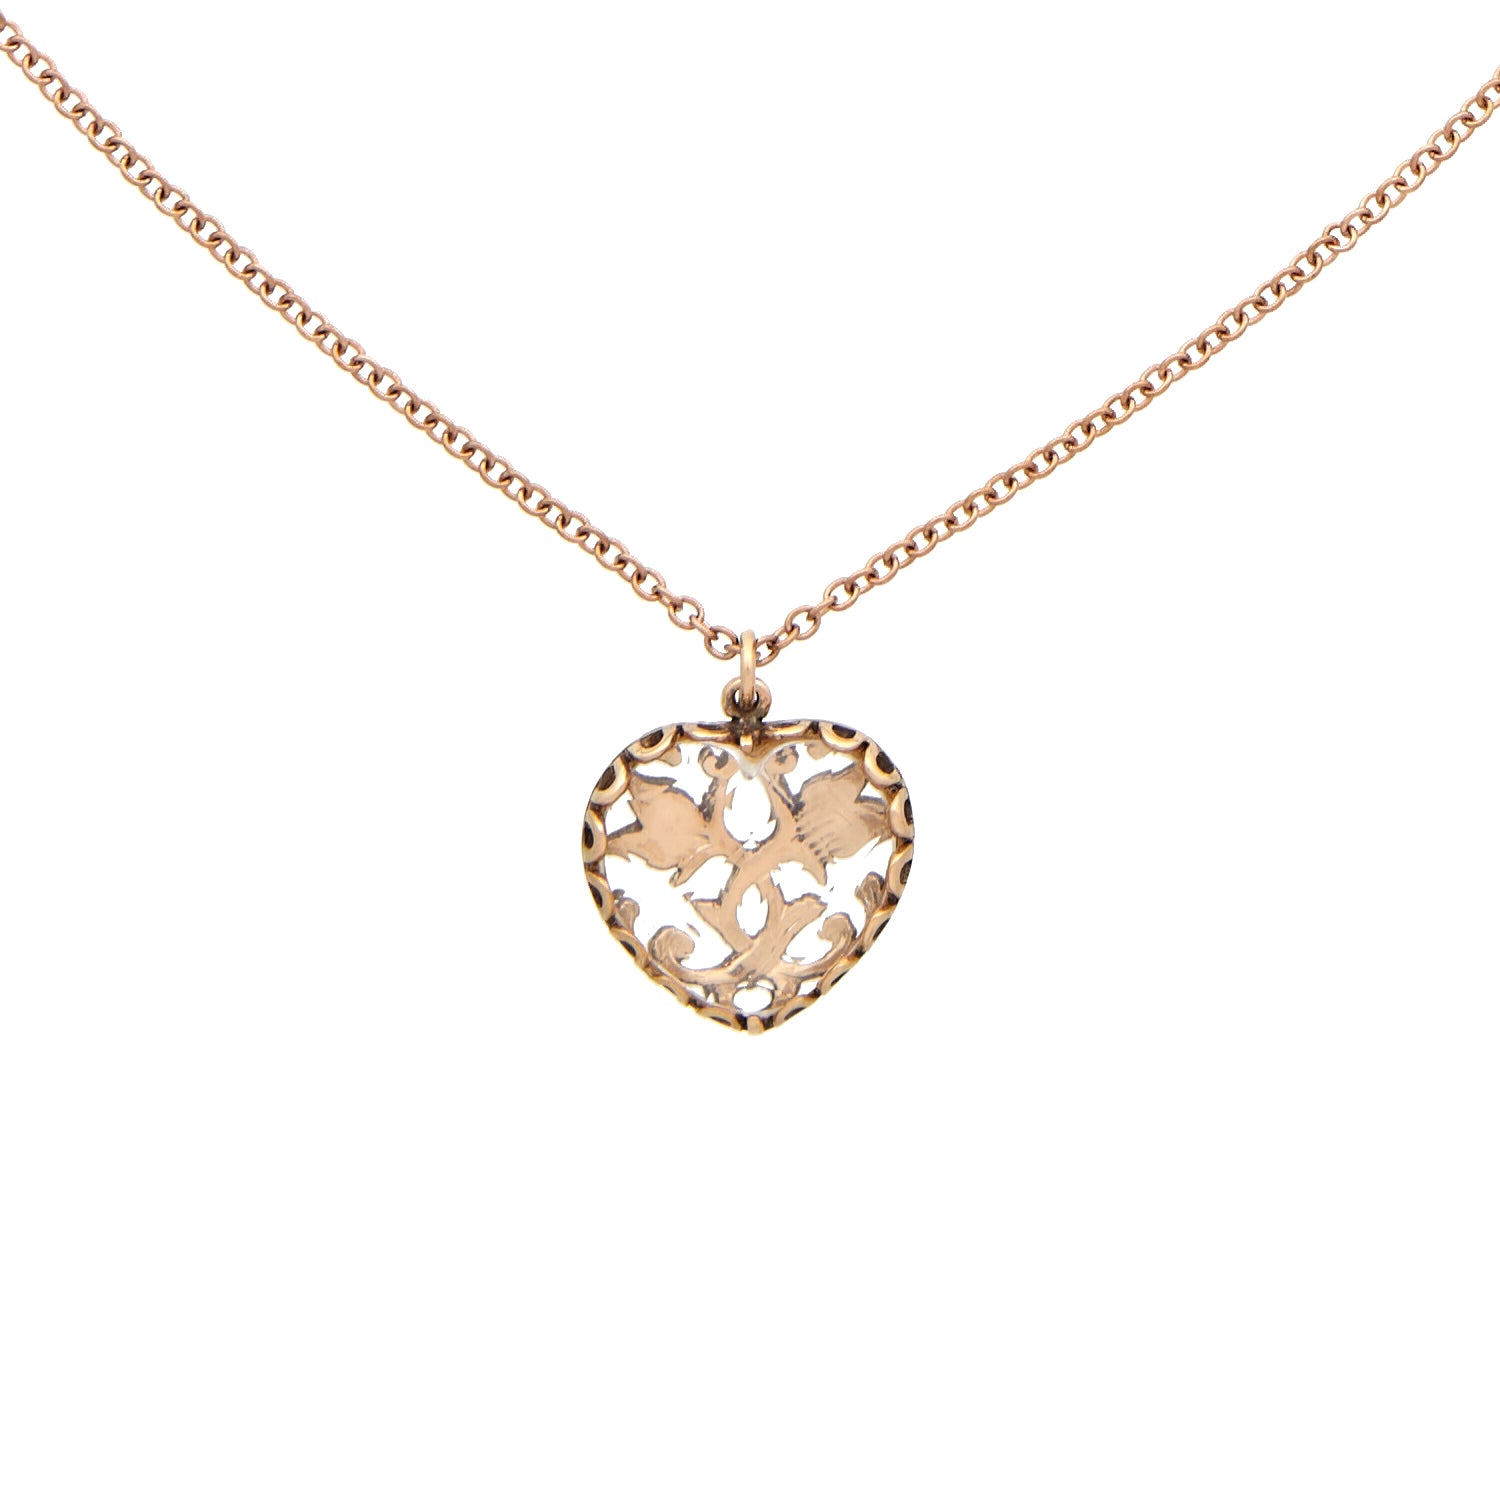 ROSE GOLD NECKLACE WITH ROCK CRYSTAL HEART